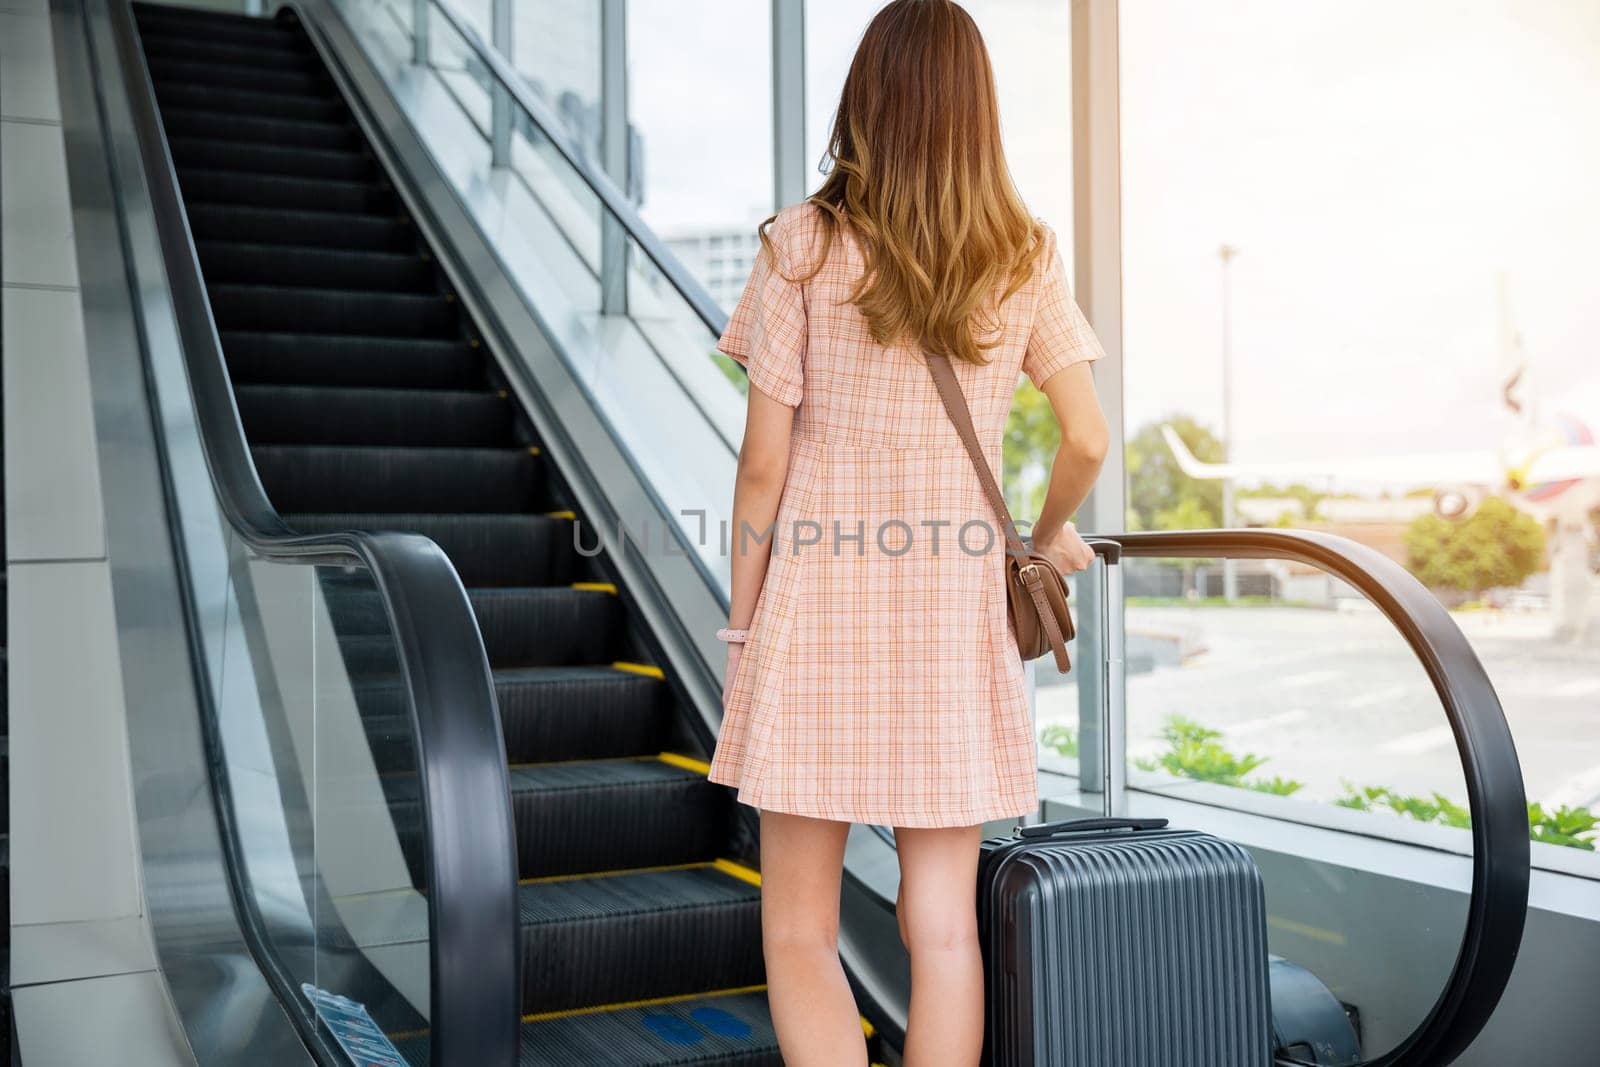 A lady in transit carries her luggage up an escalator in a bustling airport terminal. She looks forward to her destination and the exploration and attraction that awaits her